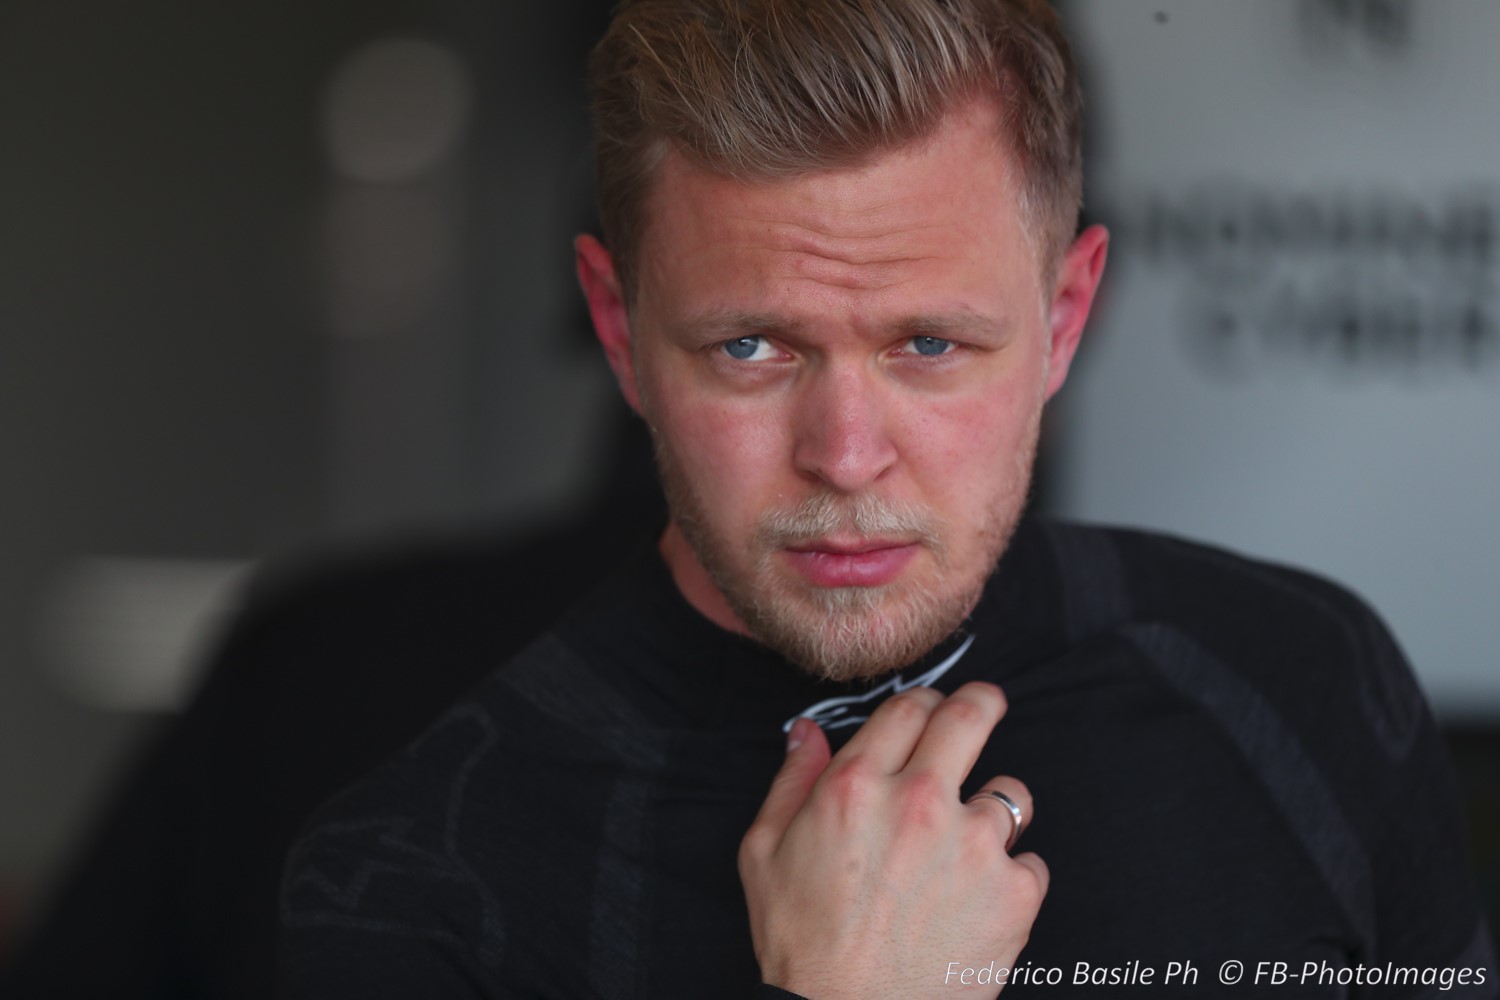 Racing in F1 with a backmarker team with 0.00% chance of winning ruins any drivers career, just ask Kevin Magnussen